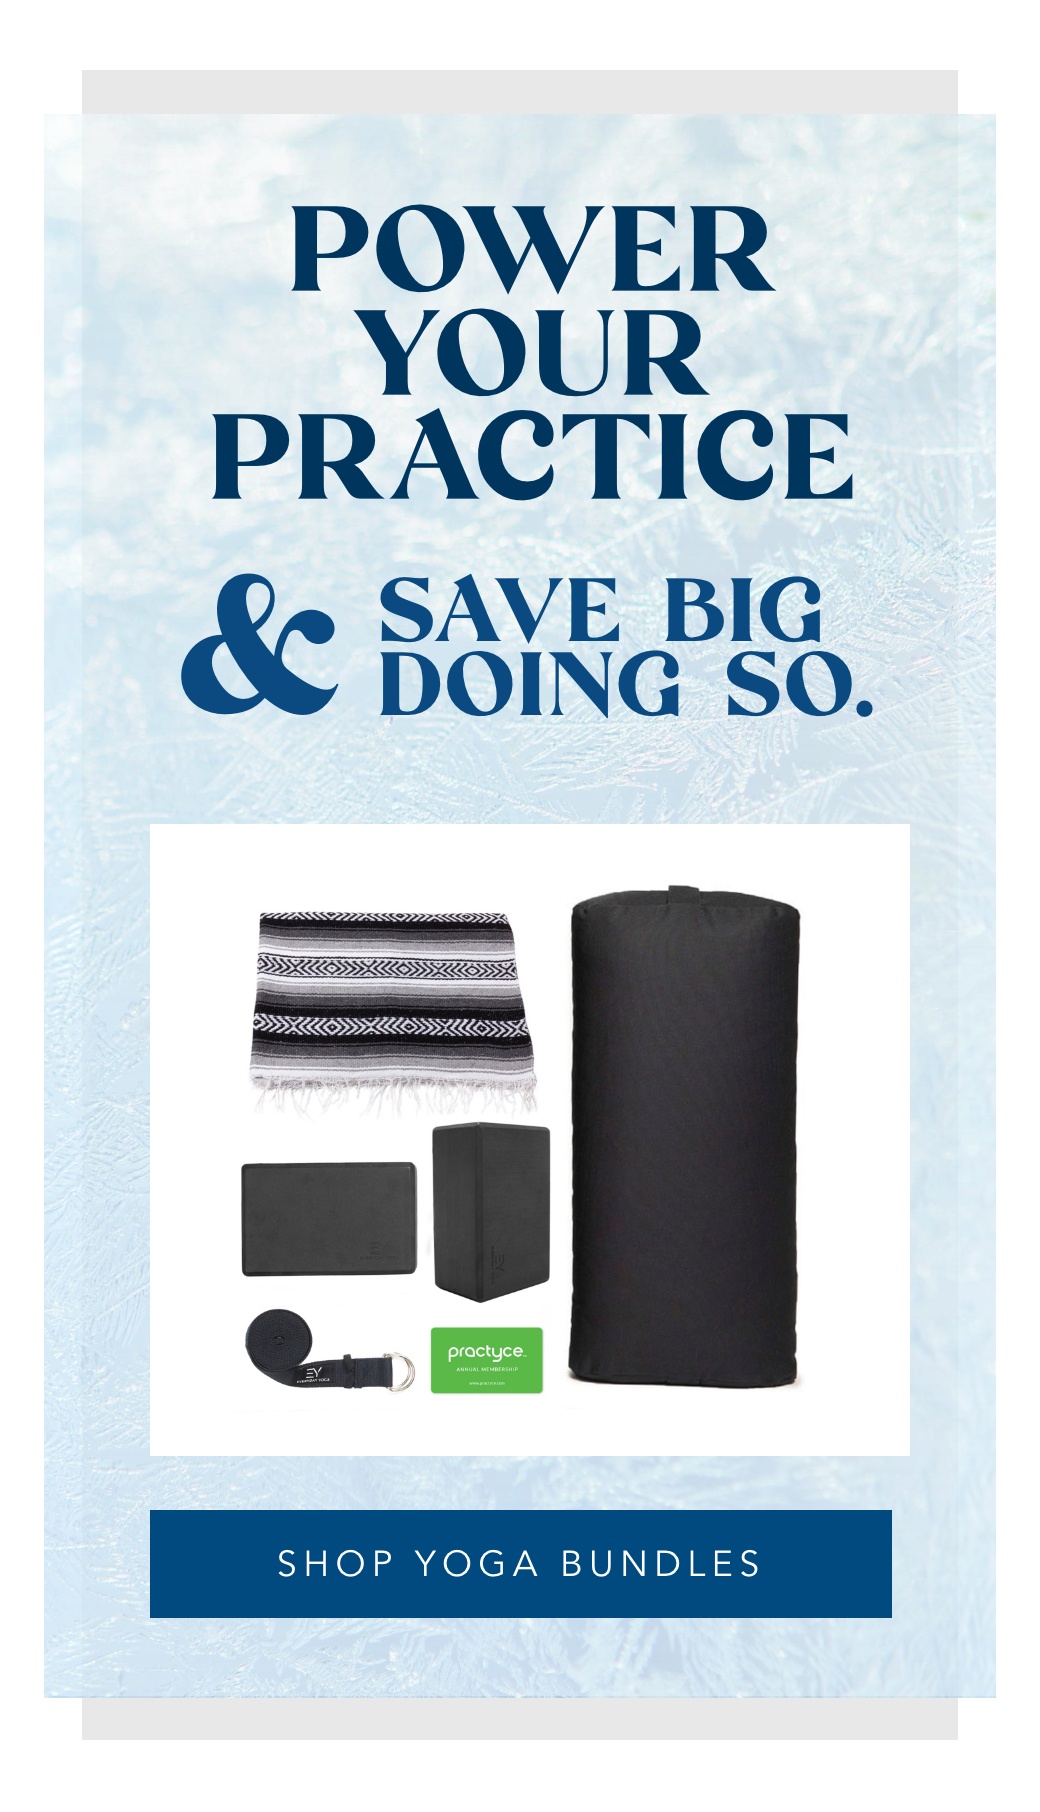 Power your practice & save big doing so.